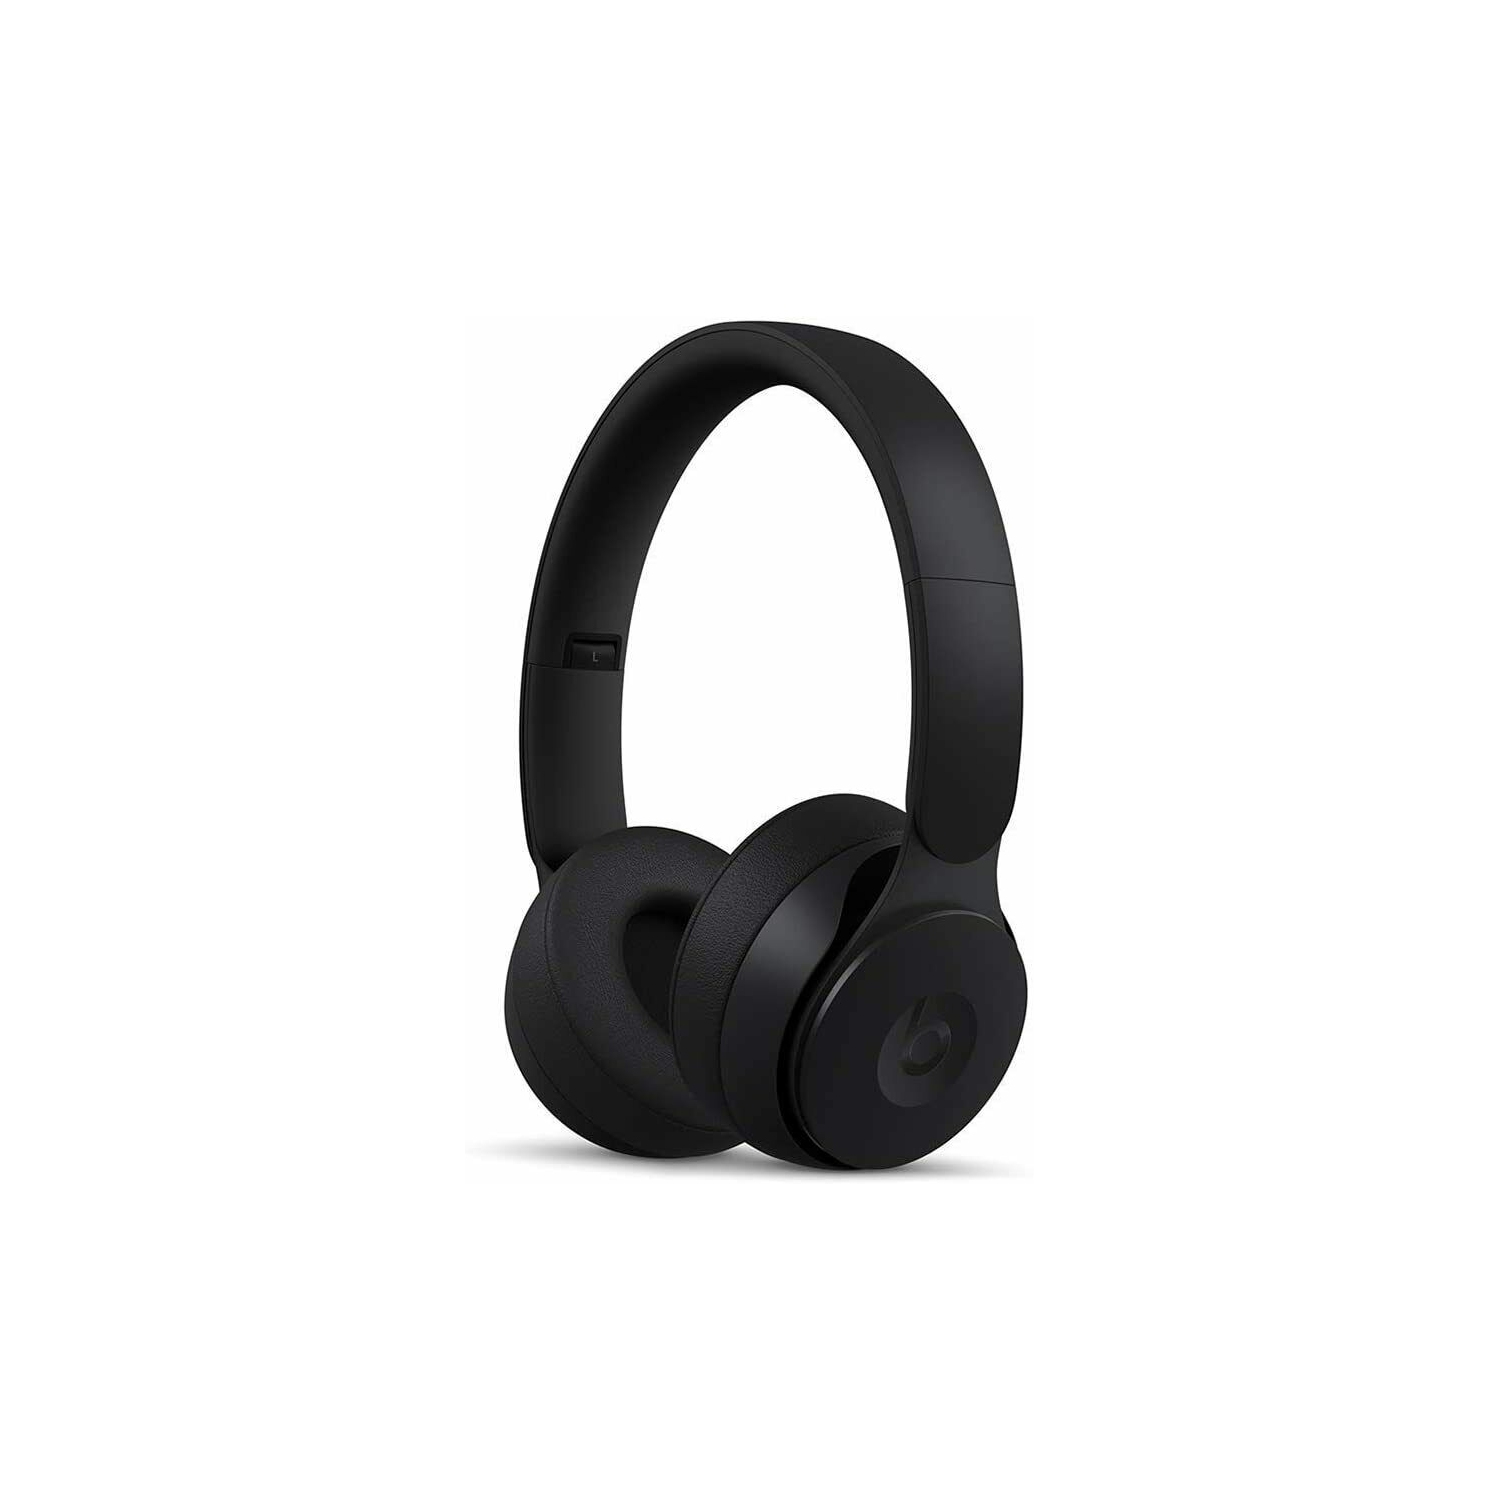 Refurbished (Excellent) - Beats Solo Pro Wireless Noise Cancelling On-Ear Headphones - Black